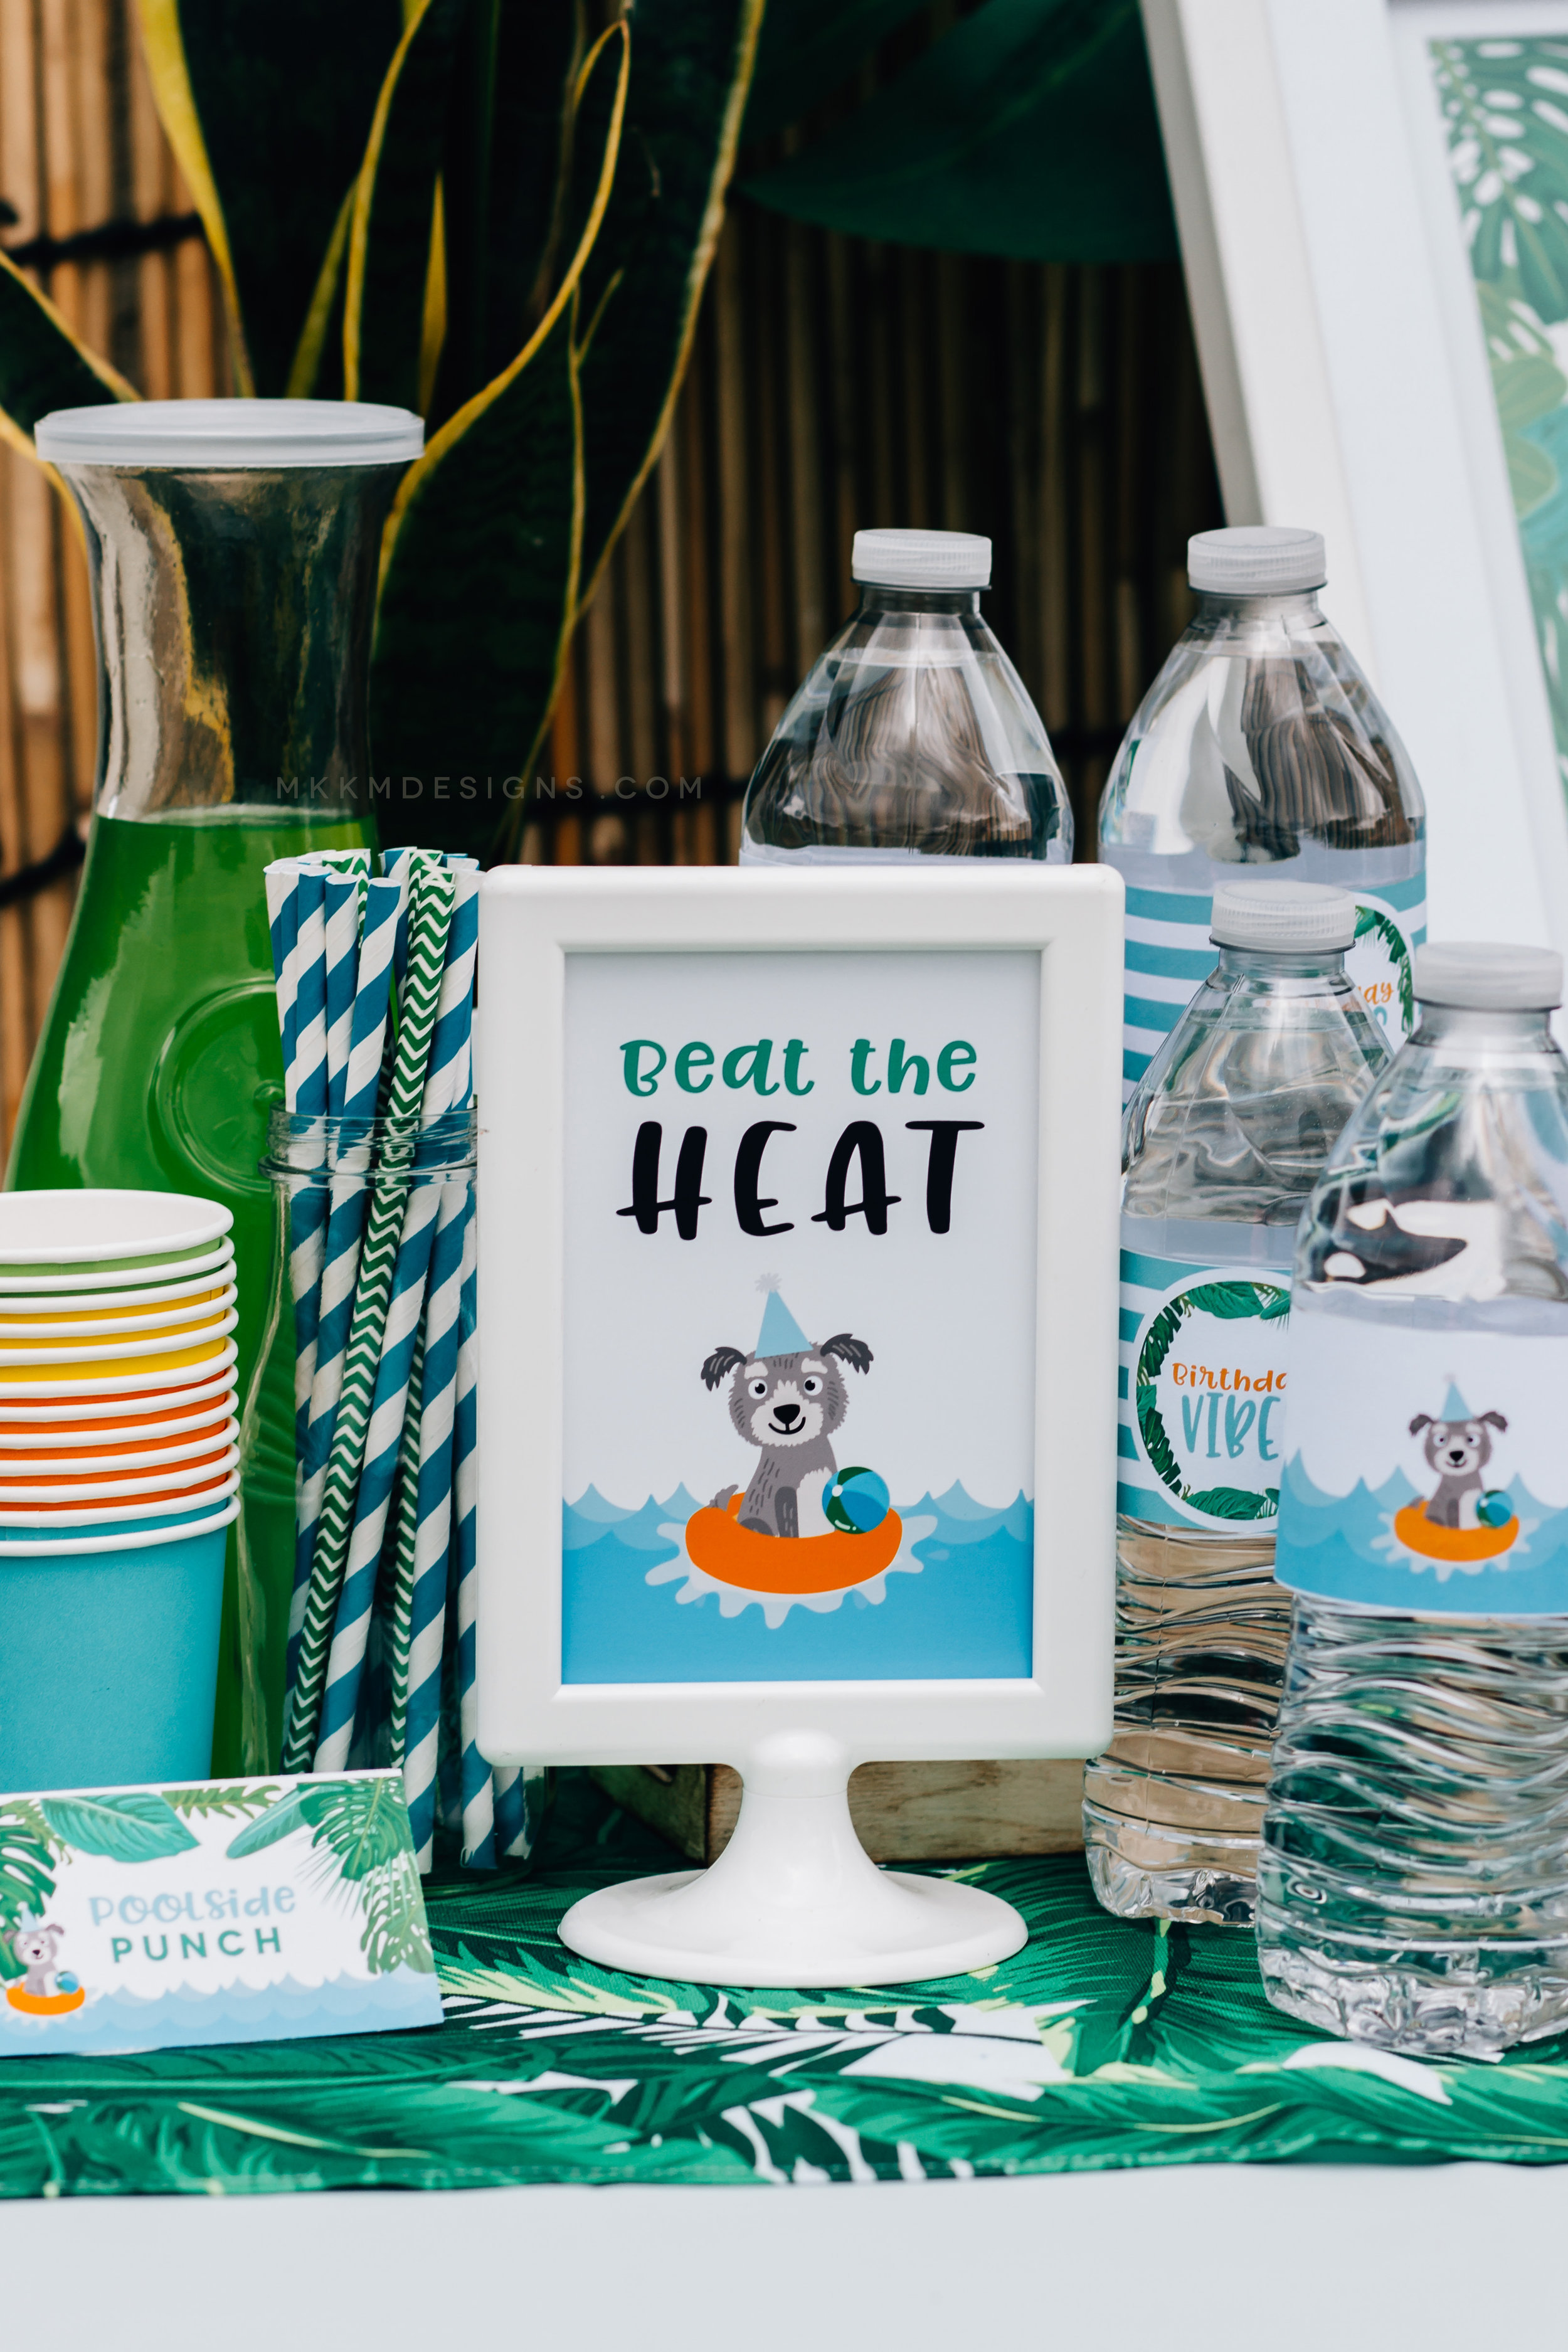 Beat the Heat drink sign from a puppy party // designs from shopmkkm.com